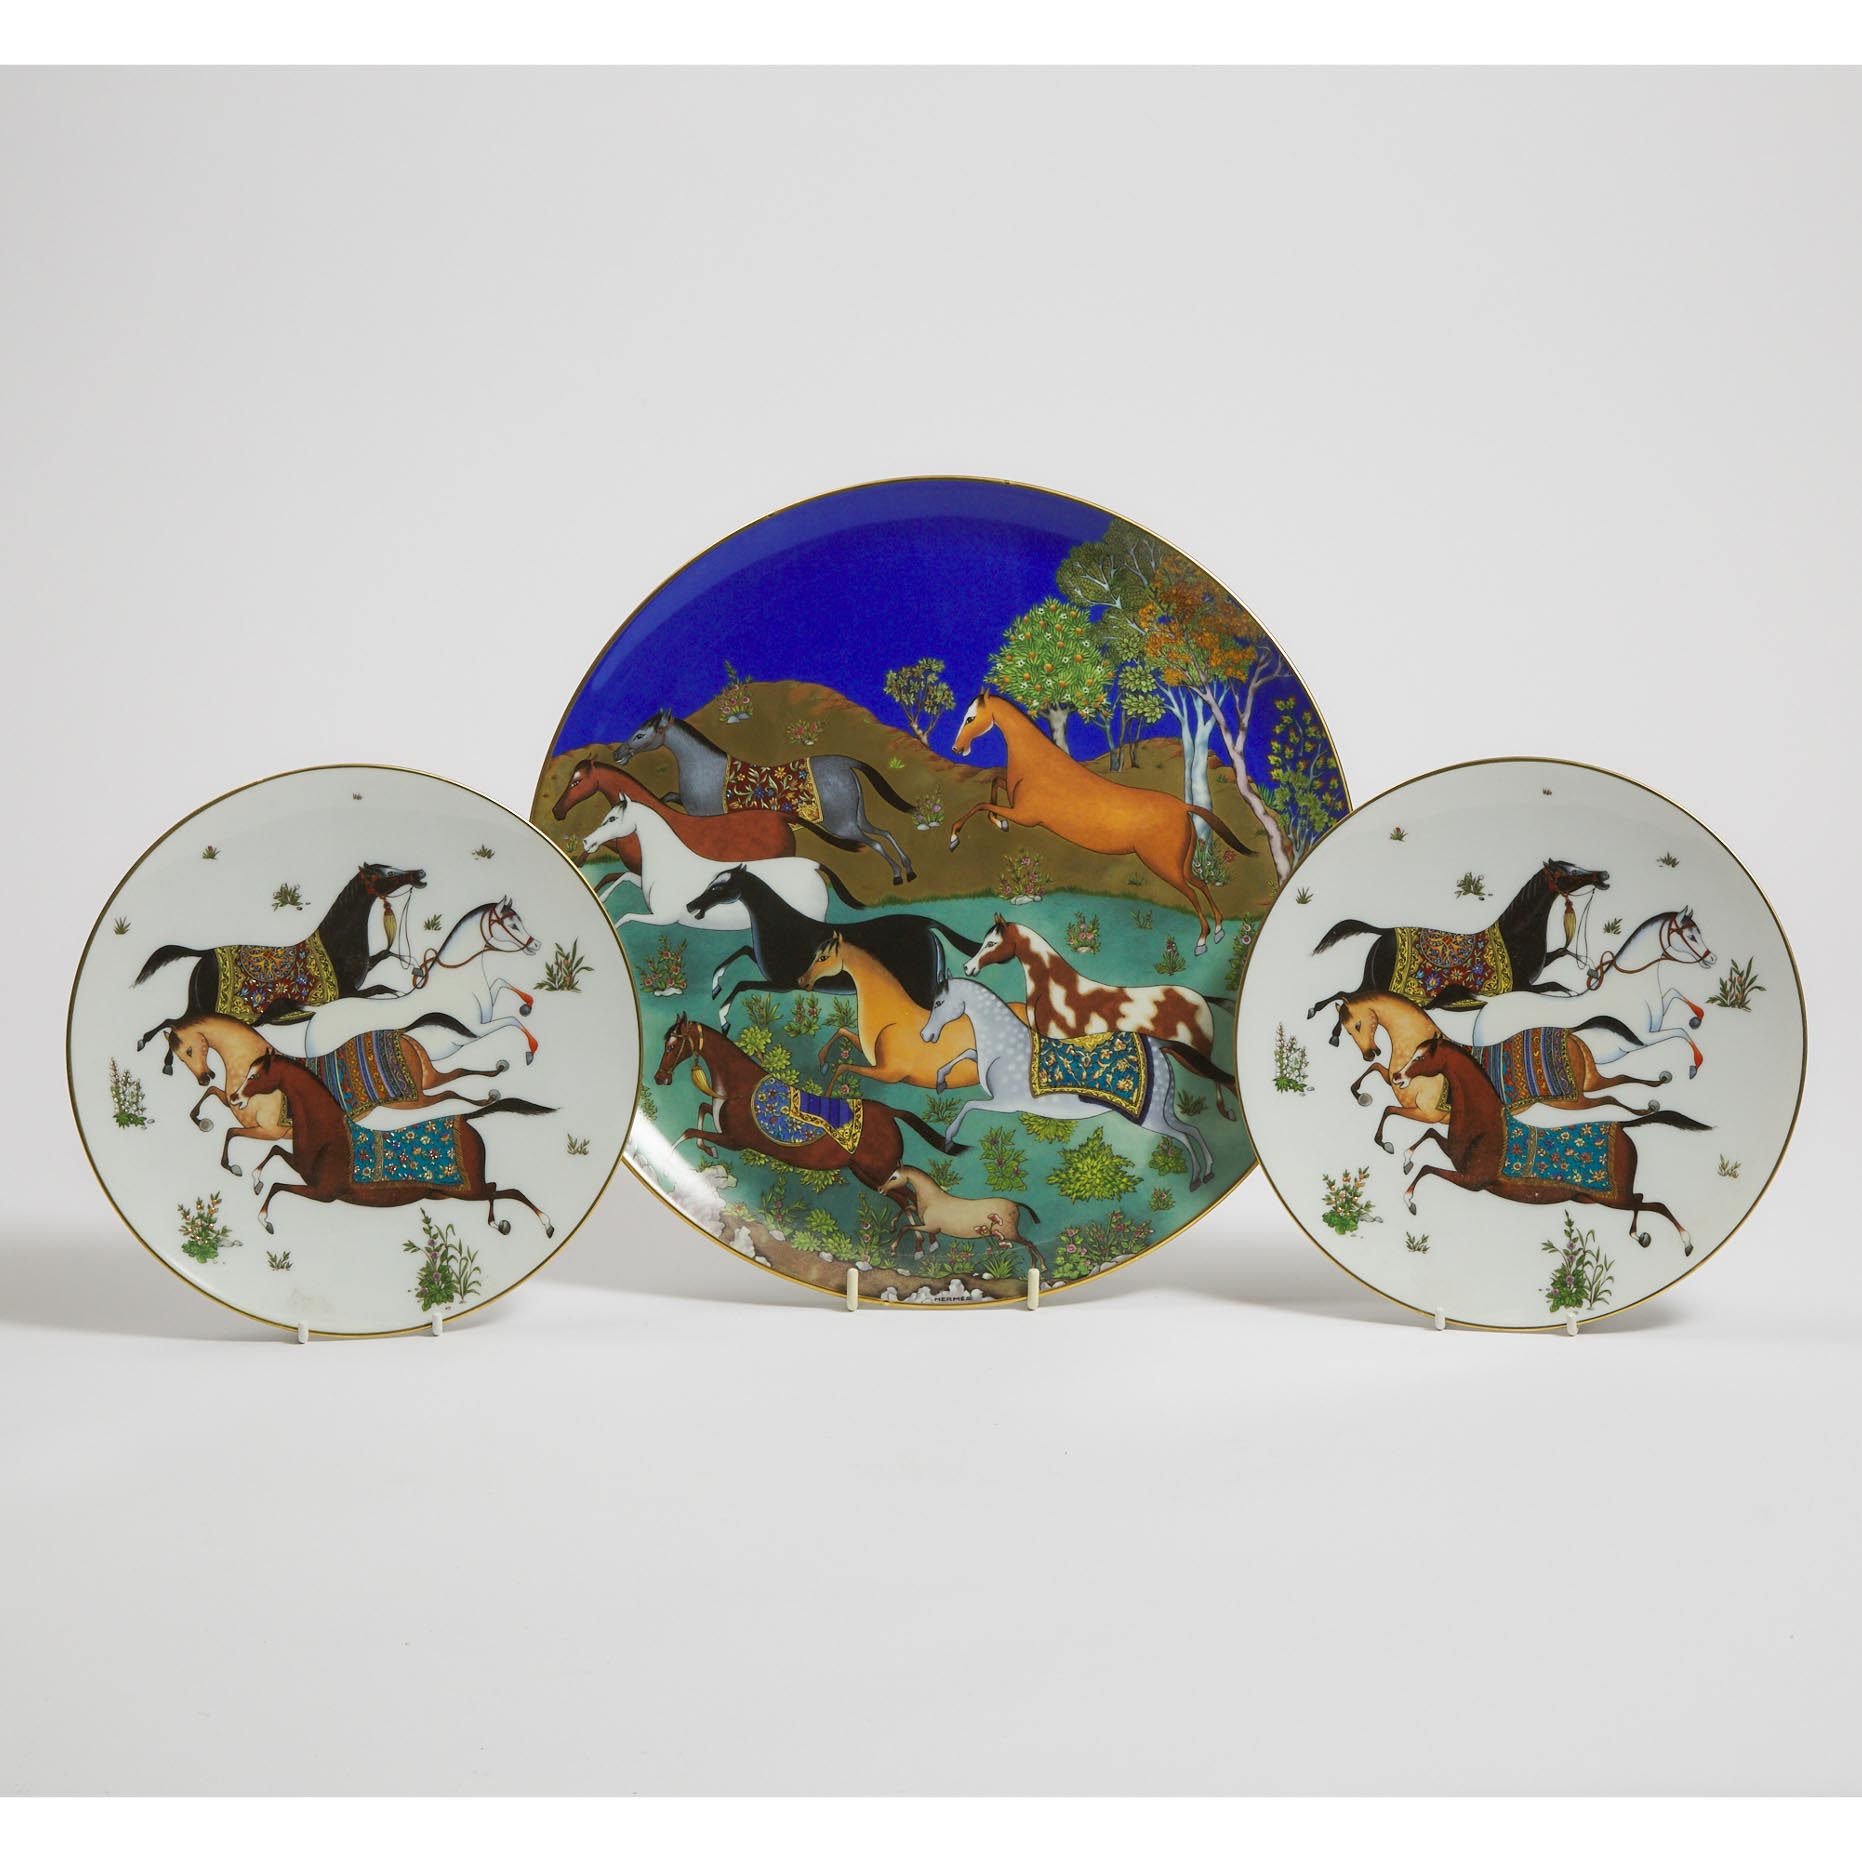 Hermès 'Cheval d'Orient' Charger and a Pair of Plates, early 21st century